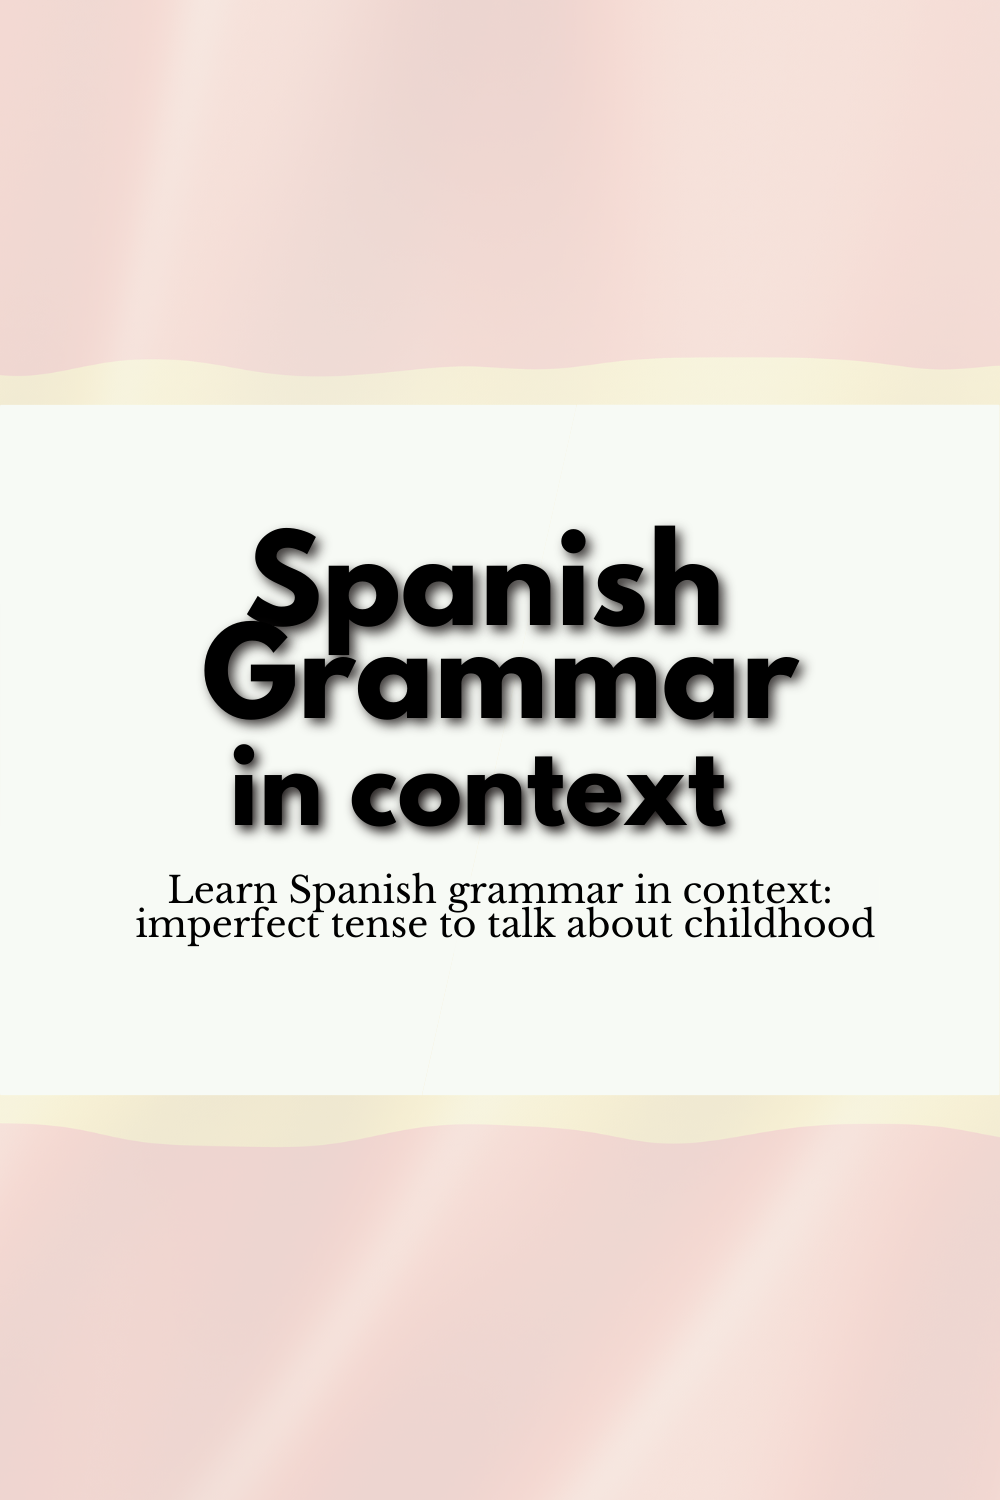 Spanish grammar in context: imperfect tense to talk about childhood